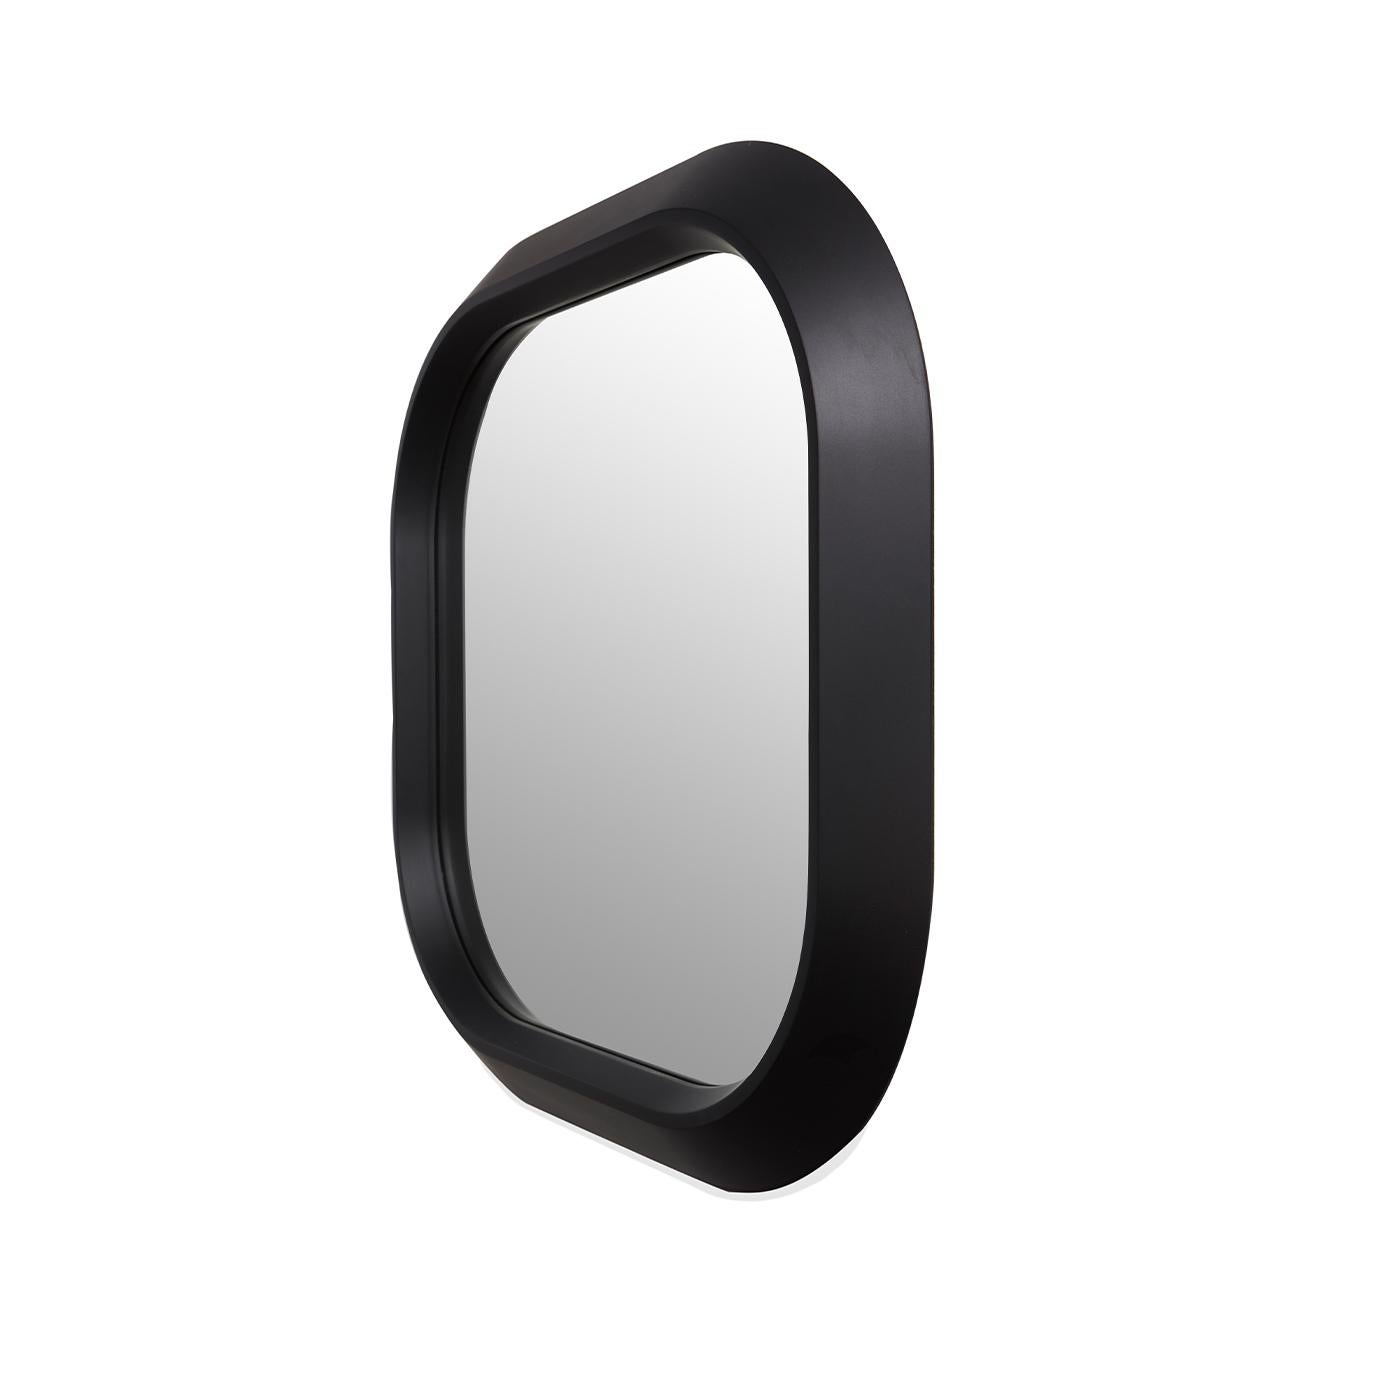 A clean and essential design that will add a luminous accent to any wall in a modern home, this mirror flaunts a sleek silhouette enclosed in a matte, black-lacquered MDF frame marked by a squared shape and rounded corners. Timeless and versatile,